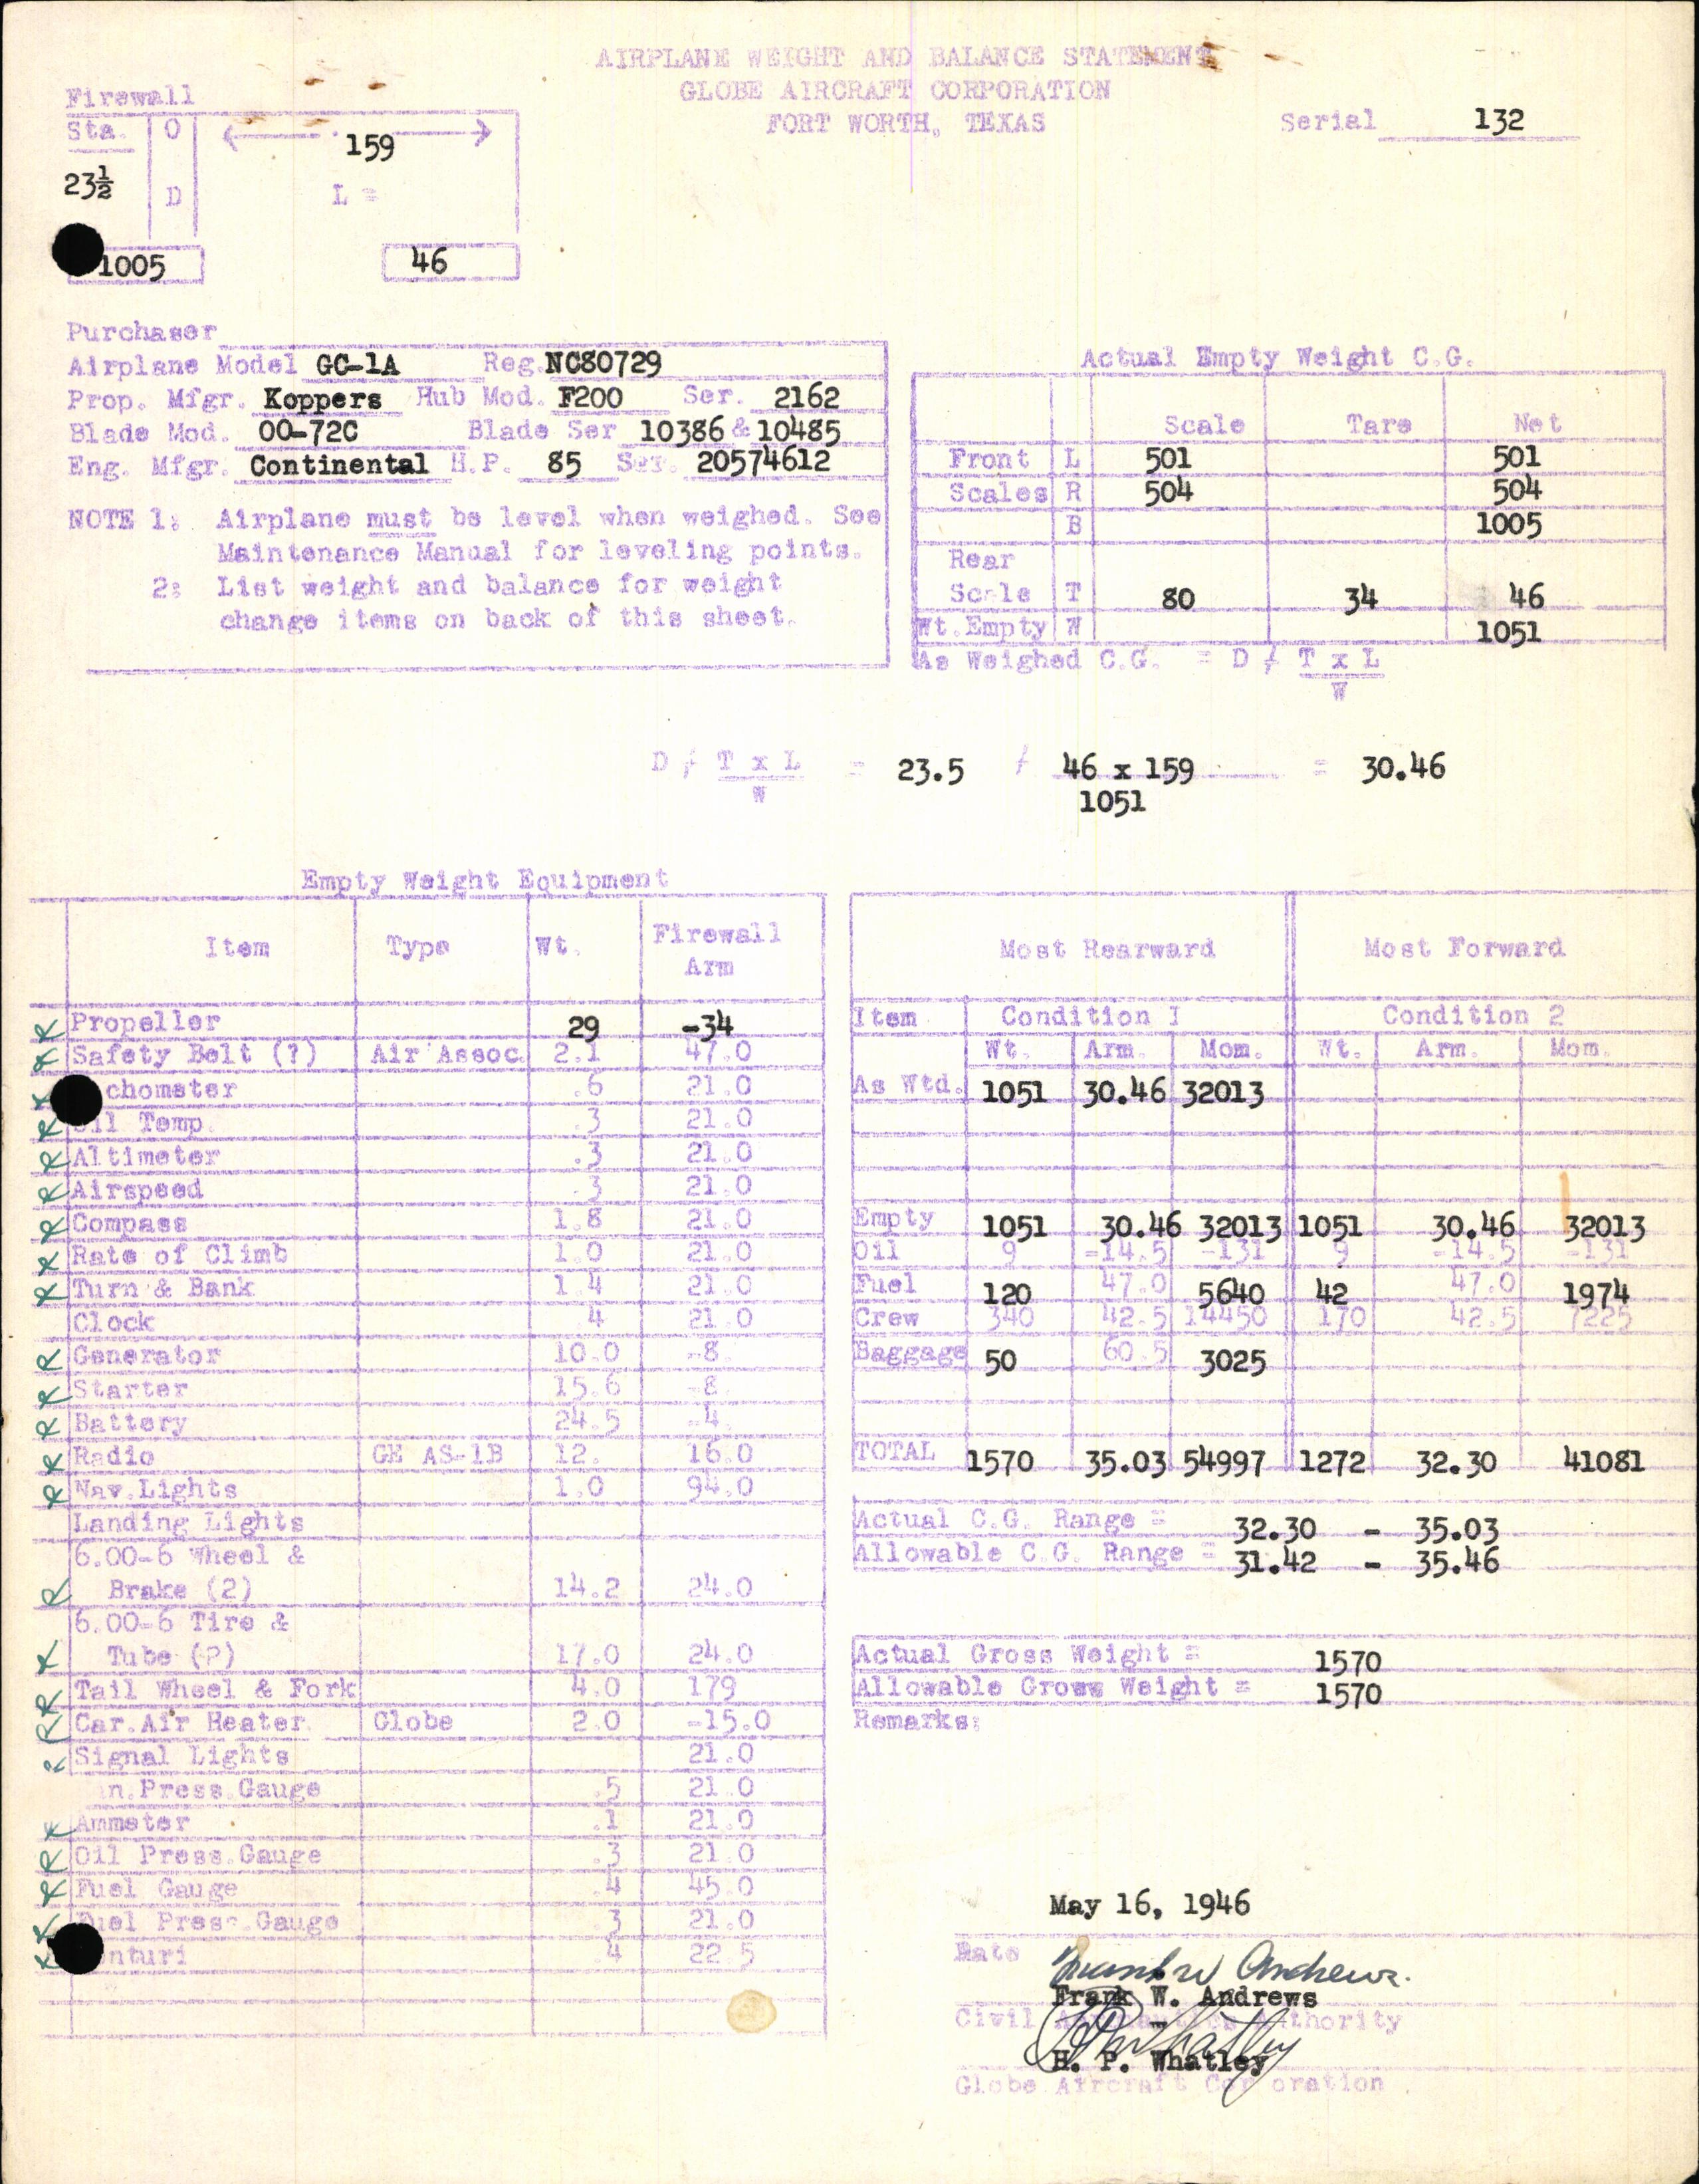 Sample page 7 from AirCorps Library document: Technical Information for Serial Number 132